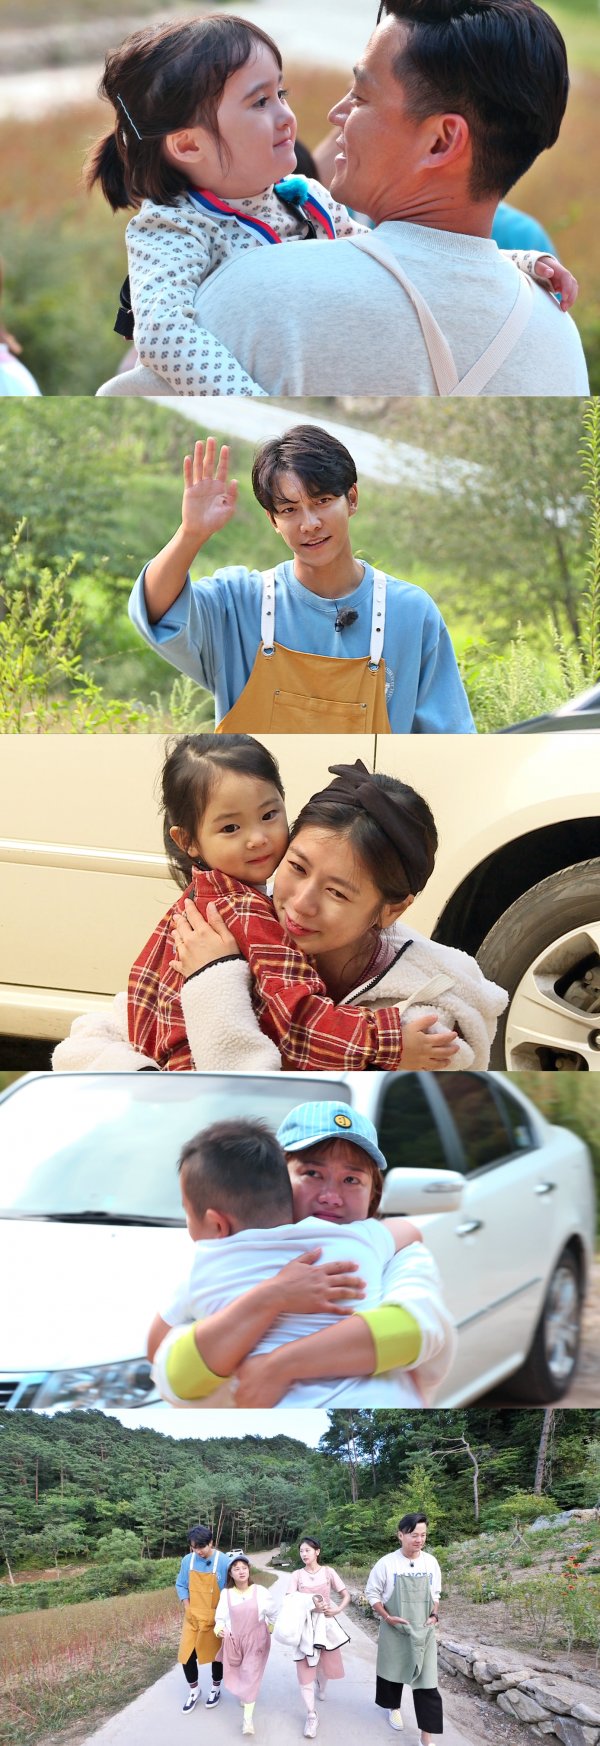 In the final episode of SBSs Monday and Thursday night entertainment Little Forest: Summer of the Bakgol (hereinafter referred to as Little Forest), Lee Seo-jin, Lee Seung-gi, Park Na-rae, Jung So-min, and four members and Little will be released.Little Forest, which had a big topic with its extraordinary formation called Moonhwa Arts for the first time on terrestrial broadcasting and its spectacular lineup of Lee Seo-jin, X Lee Seung-gi, X Park Na-rae, X Jung So-min, will finish the 16-part long-term episode after the broadcast today (7th).Recently, the members shared their last greetings with the little ones they had chosen.Jung So-min poured tears into Brookes words, I will be Little Forests aunt when I grow up, and Park Na-rae, who had been tearing until the end, showed tears of regret and showed tears of sadness.Finally, Lee Seo-jin, a Sosweet Nam who confessed that he had never seen tears in any broadcast, also surprised everyone with his appearance.Lee Seo-jin, the 21st year of his debut, draws attention to why he first tears up on the show.The affectionate farewell between Uncle Lee and Little can be seen at the final episode of Little Forest, which airs at 10 p.m. tonight.